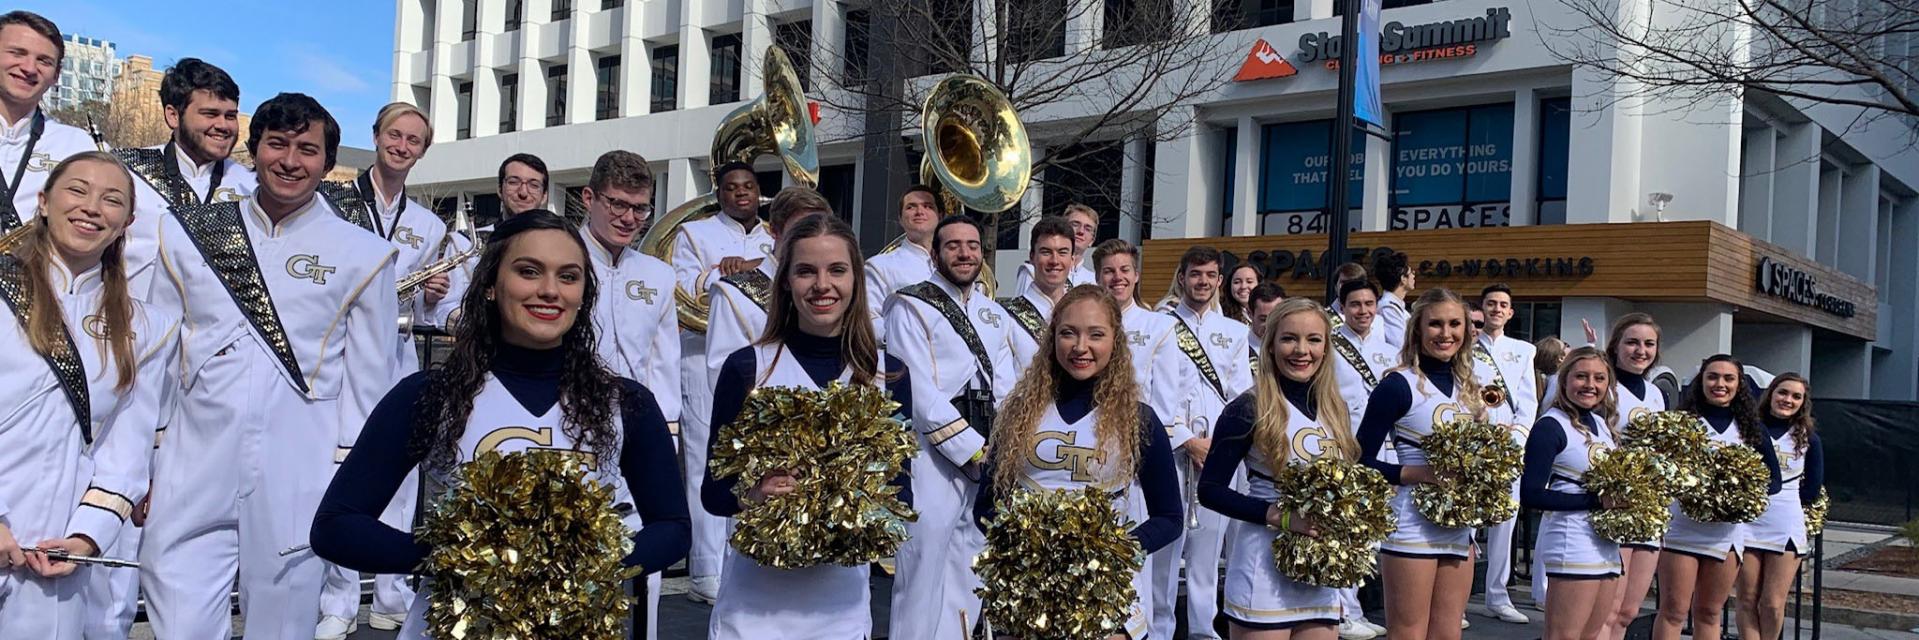 The Pep Band before a performance at the Super Bowl LIVE show.